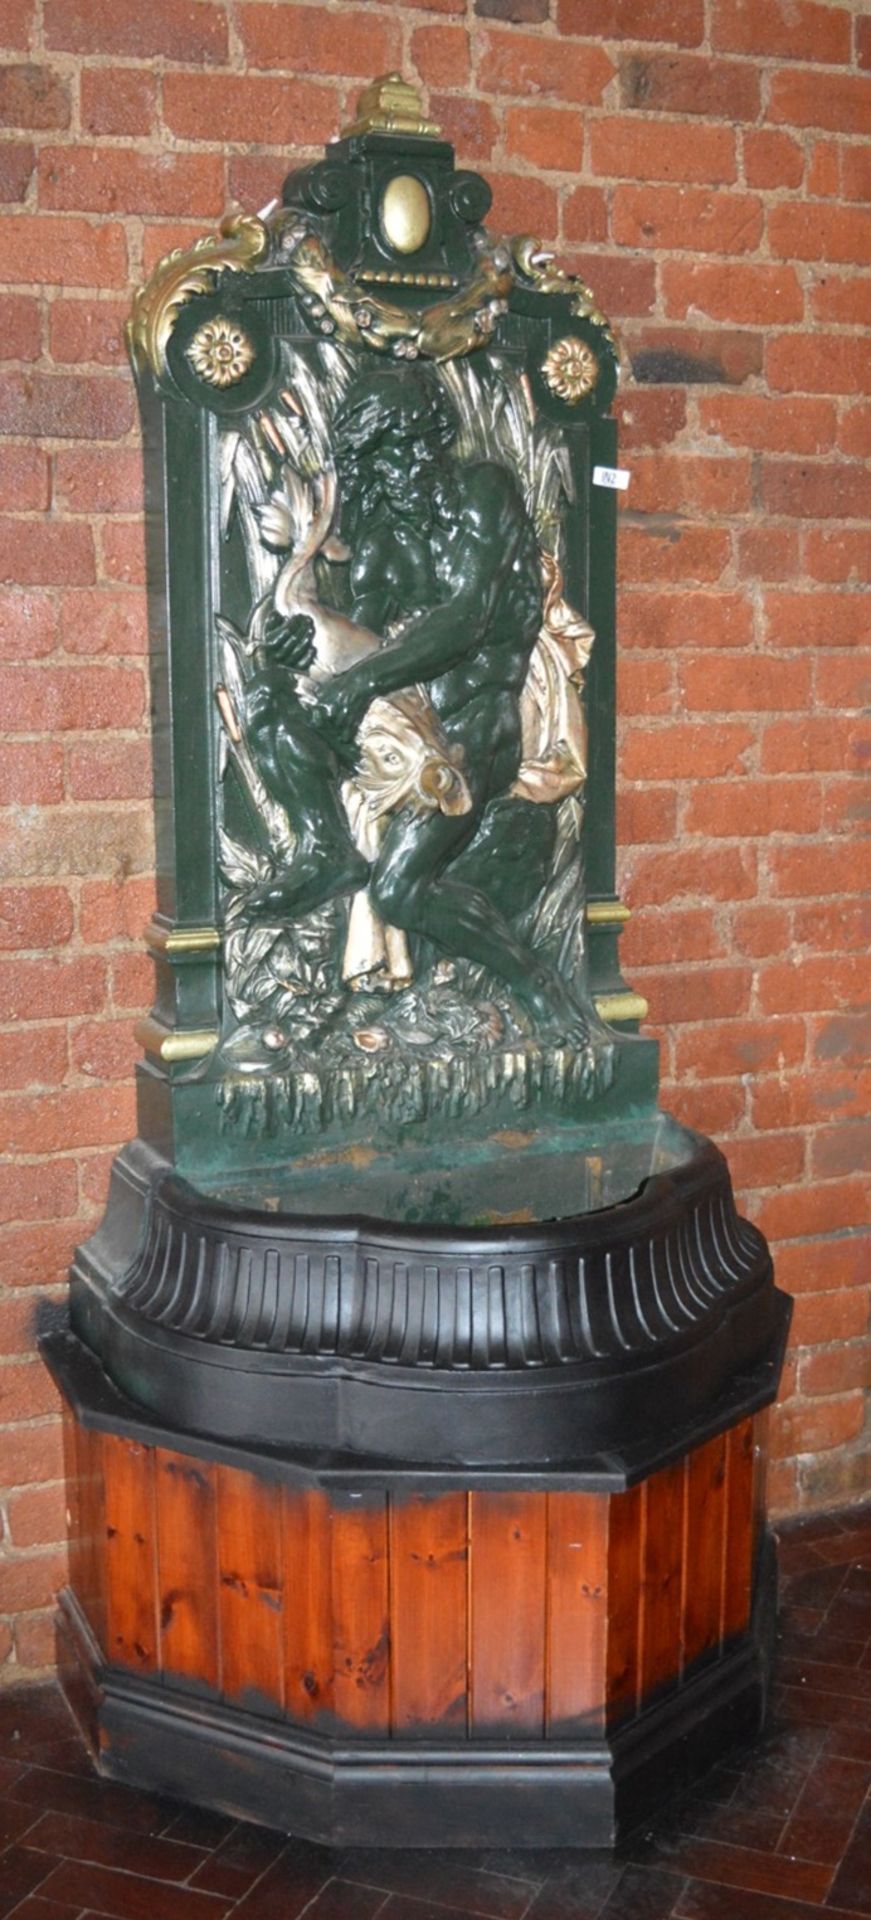 1 x Cast Metal Water Fountain Depicting Greek Man and Serpent - Finished in Green and Gold - H210 x